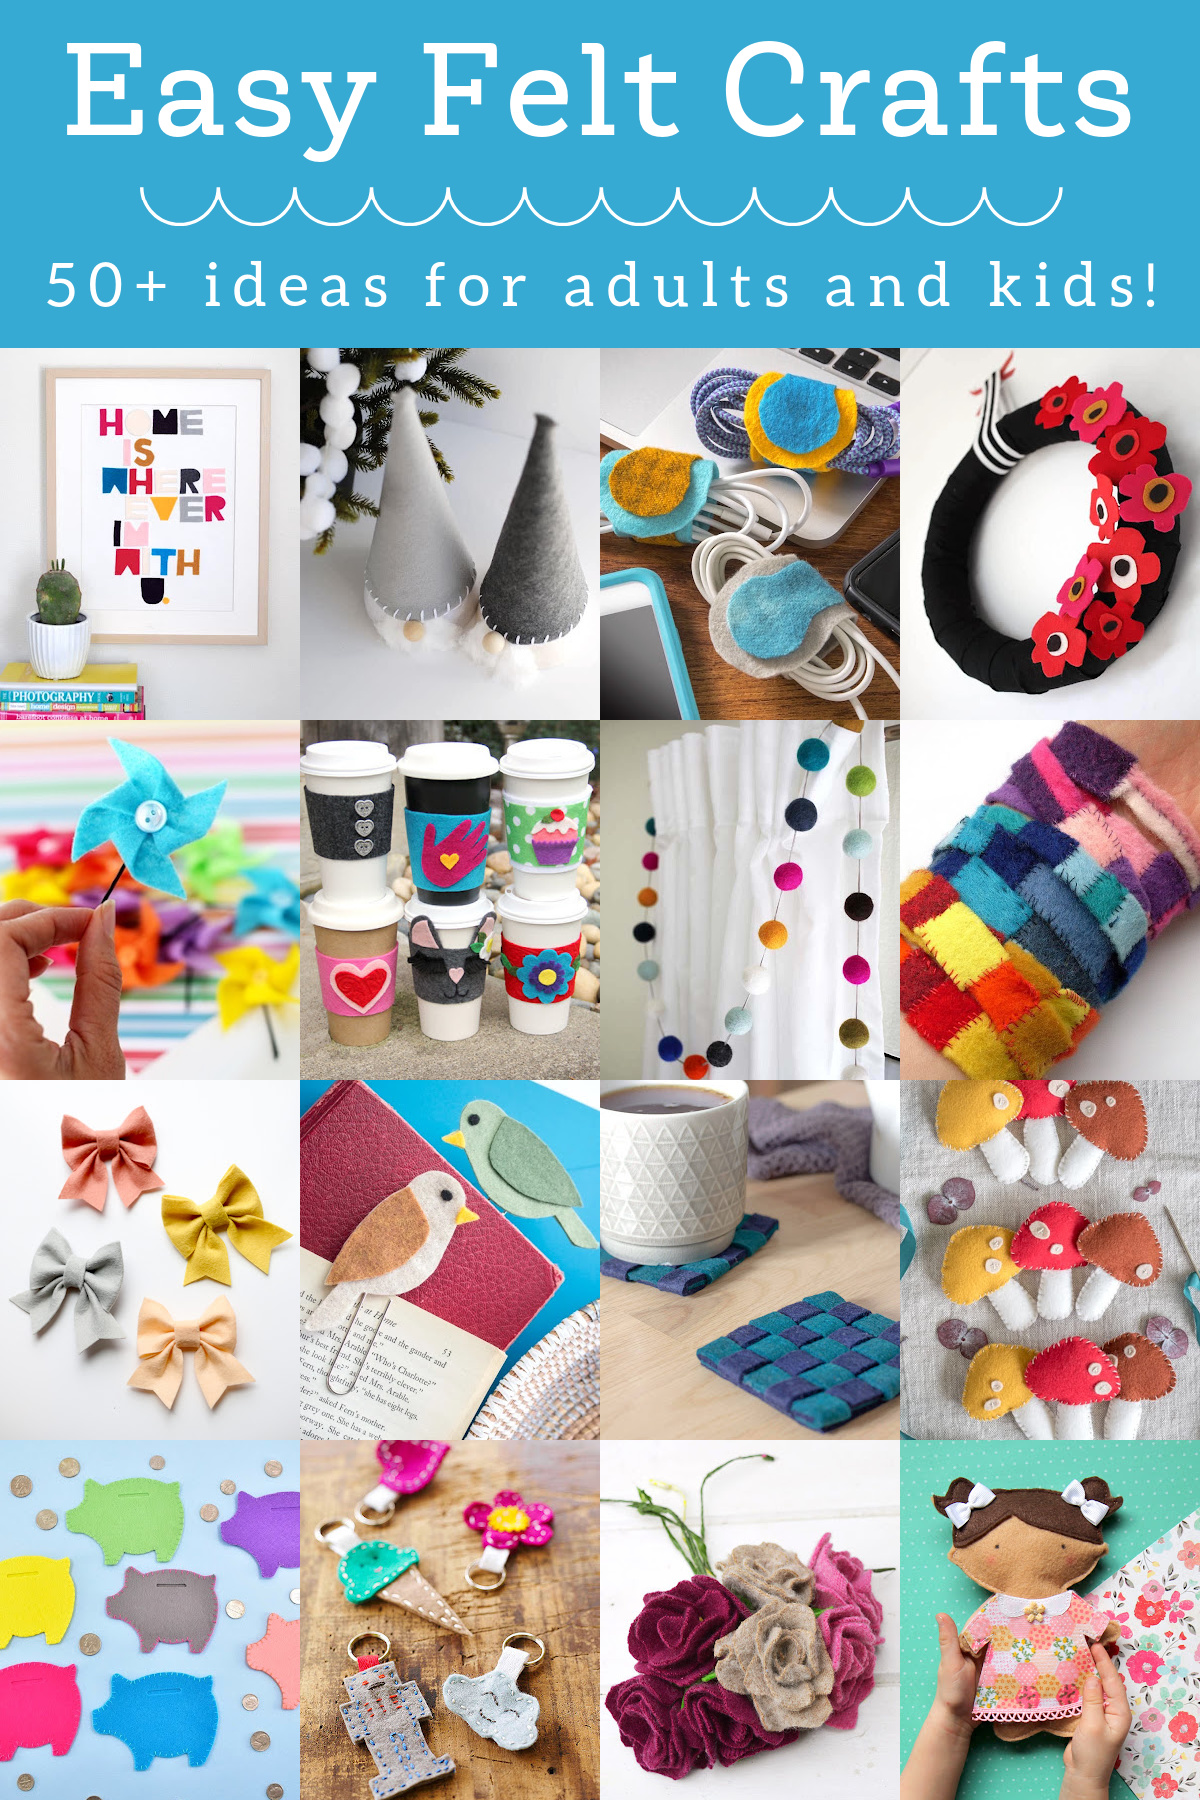 Crafting at Home: 32 Super Fun Felt Projects for Kids